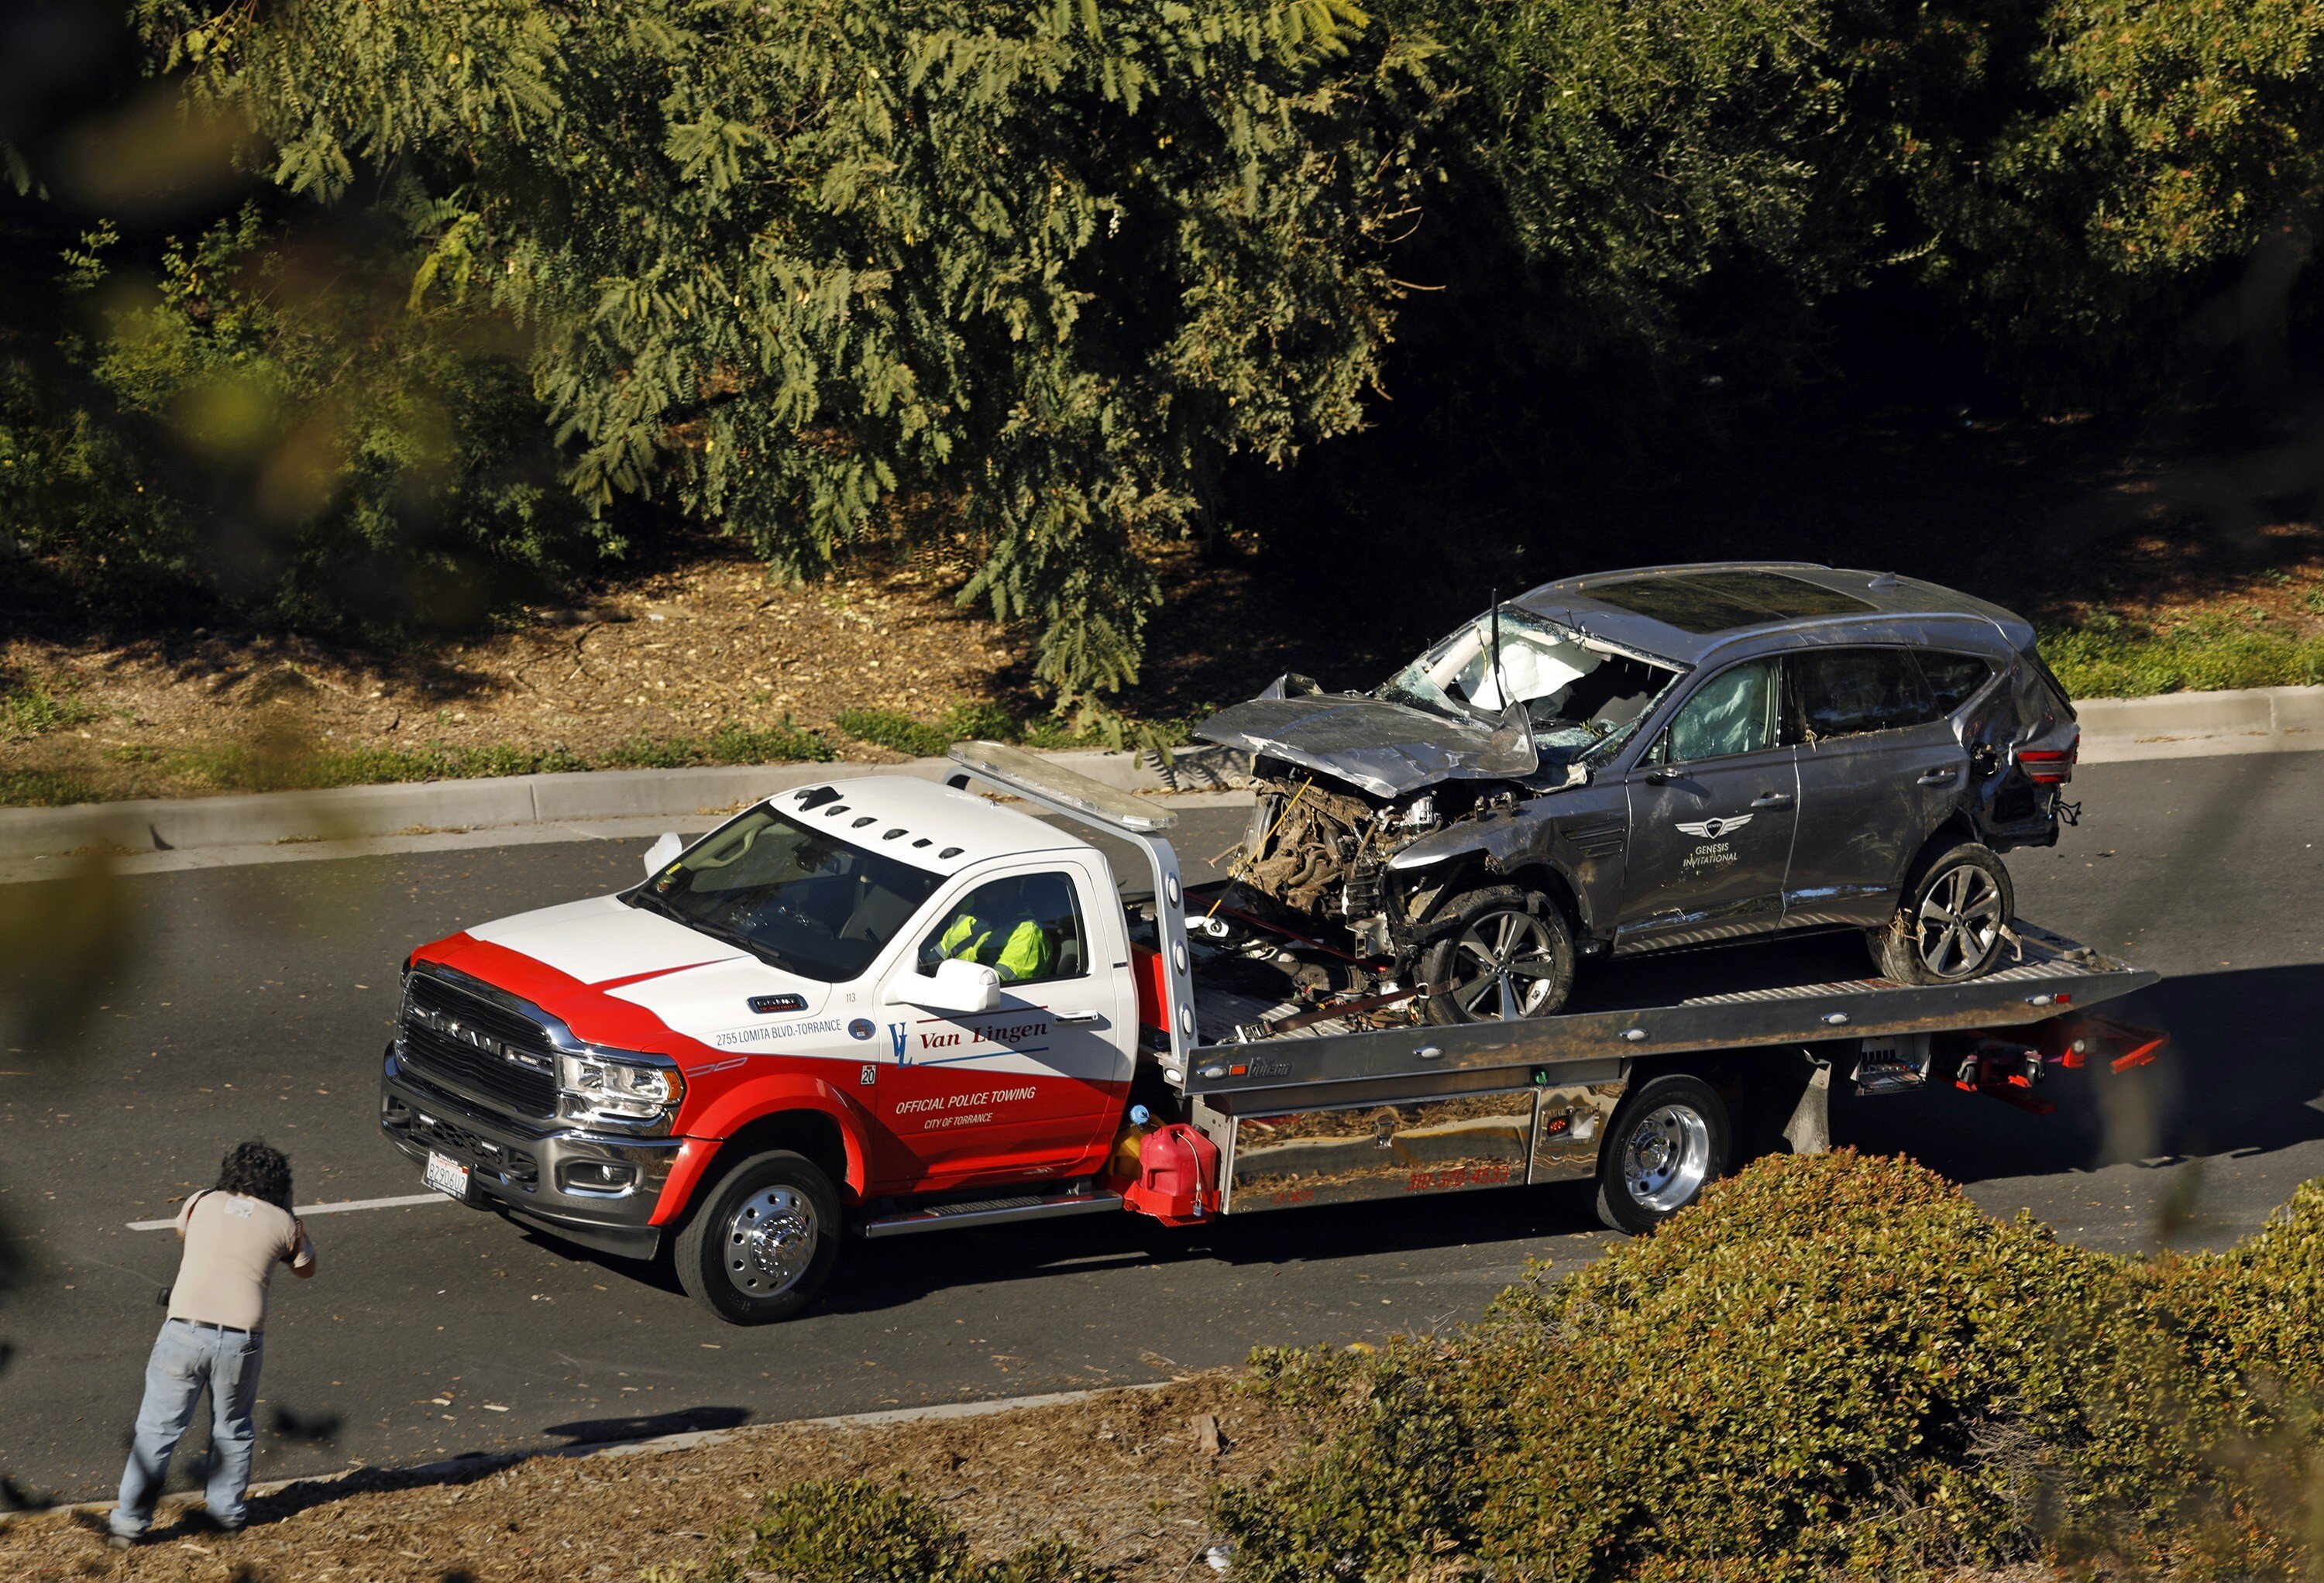 The vehicle driven by US golf legend Tiger Woods is towed away on Hawthorne Boulevard in California on Tuesday. Photo: TNS